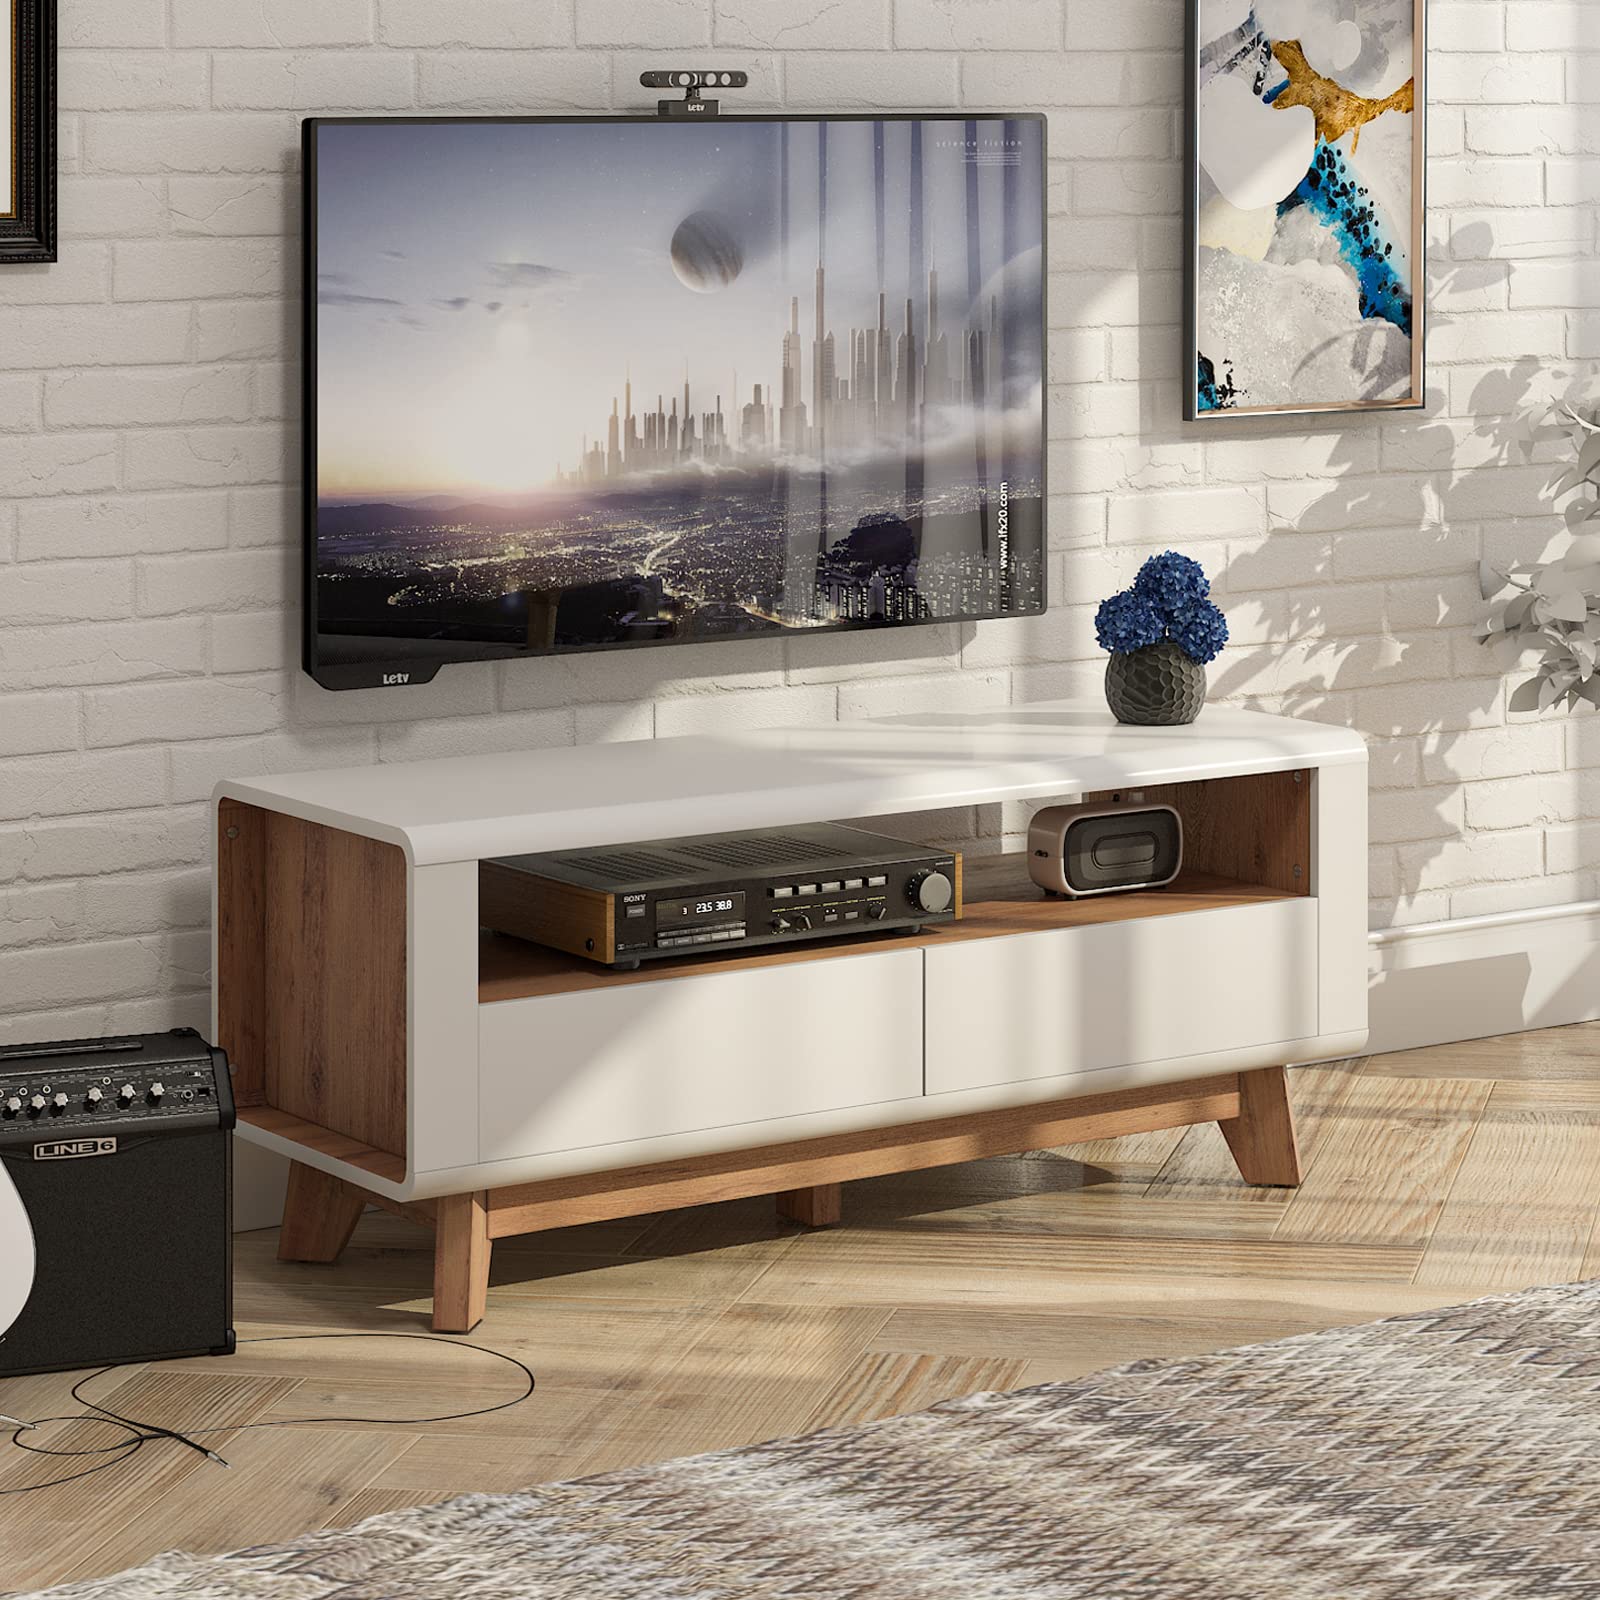 Tangkula Modern TV Stand with Drawers, Wood Entertainment Center for TVs up to 50 Inch